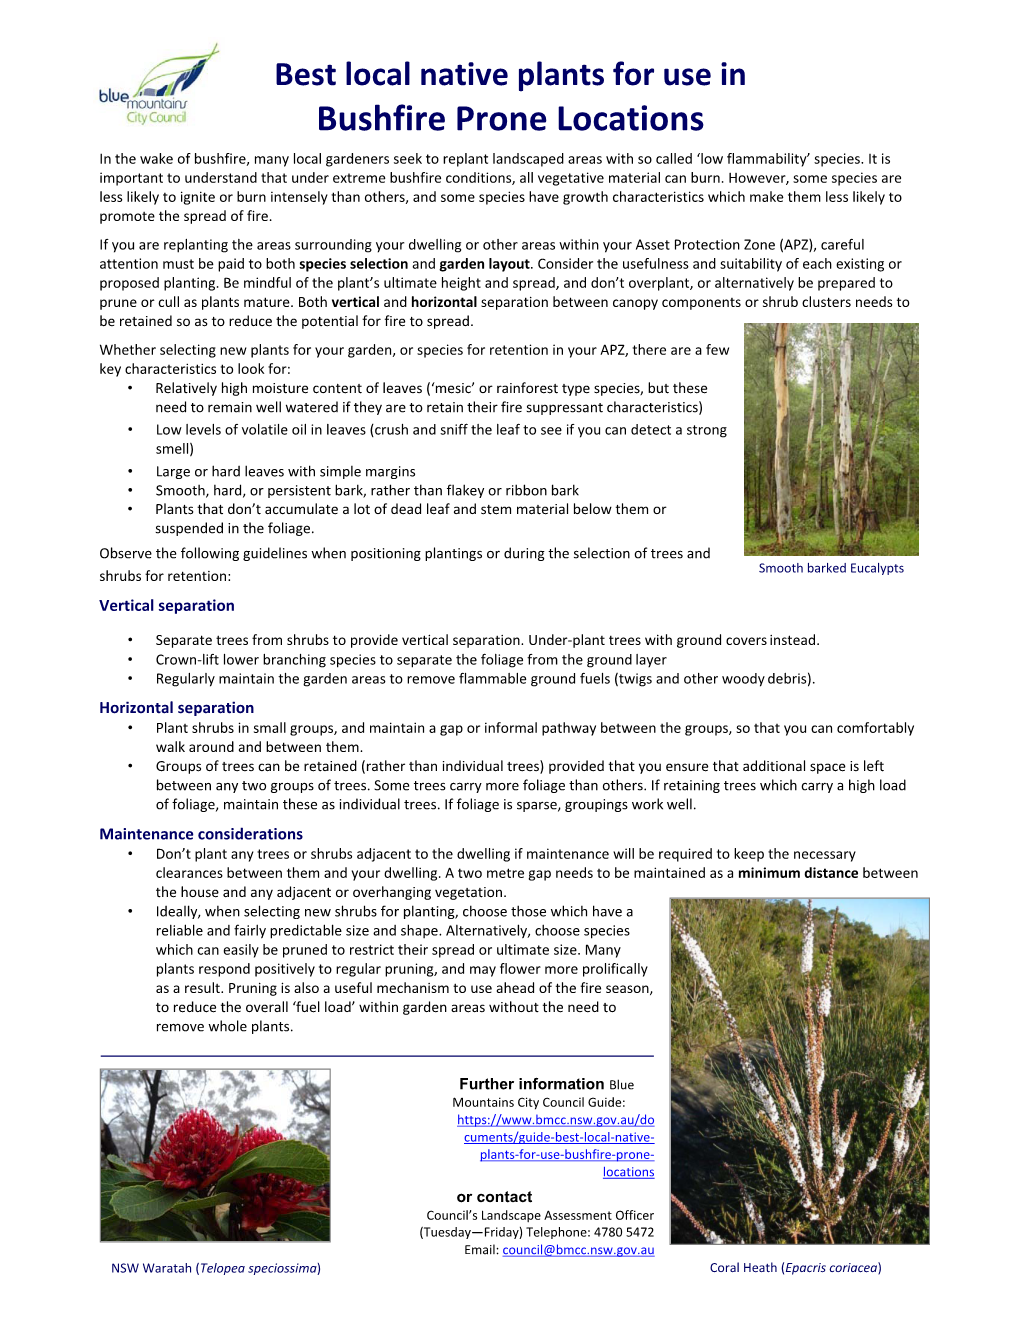 Best Local Native Plants for Use in Bushfire Prone Locations